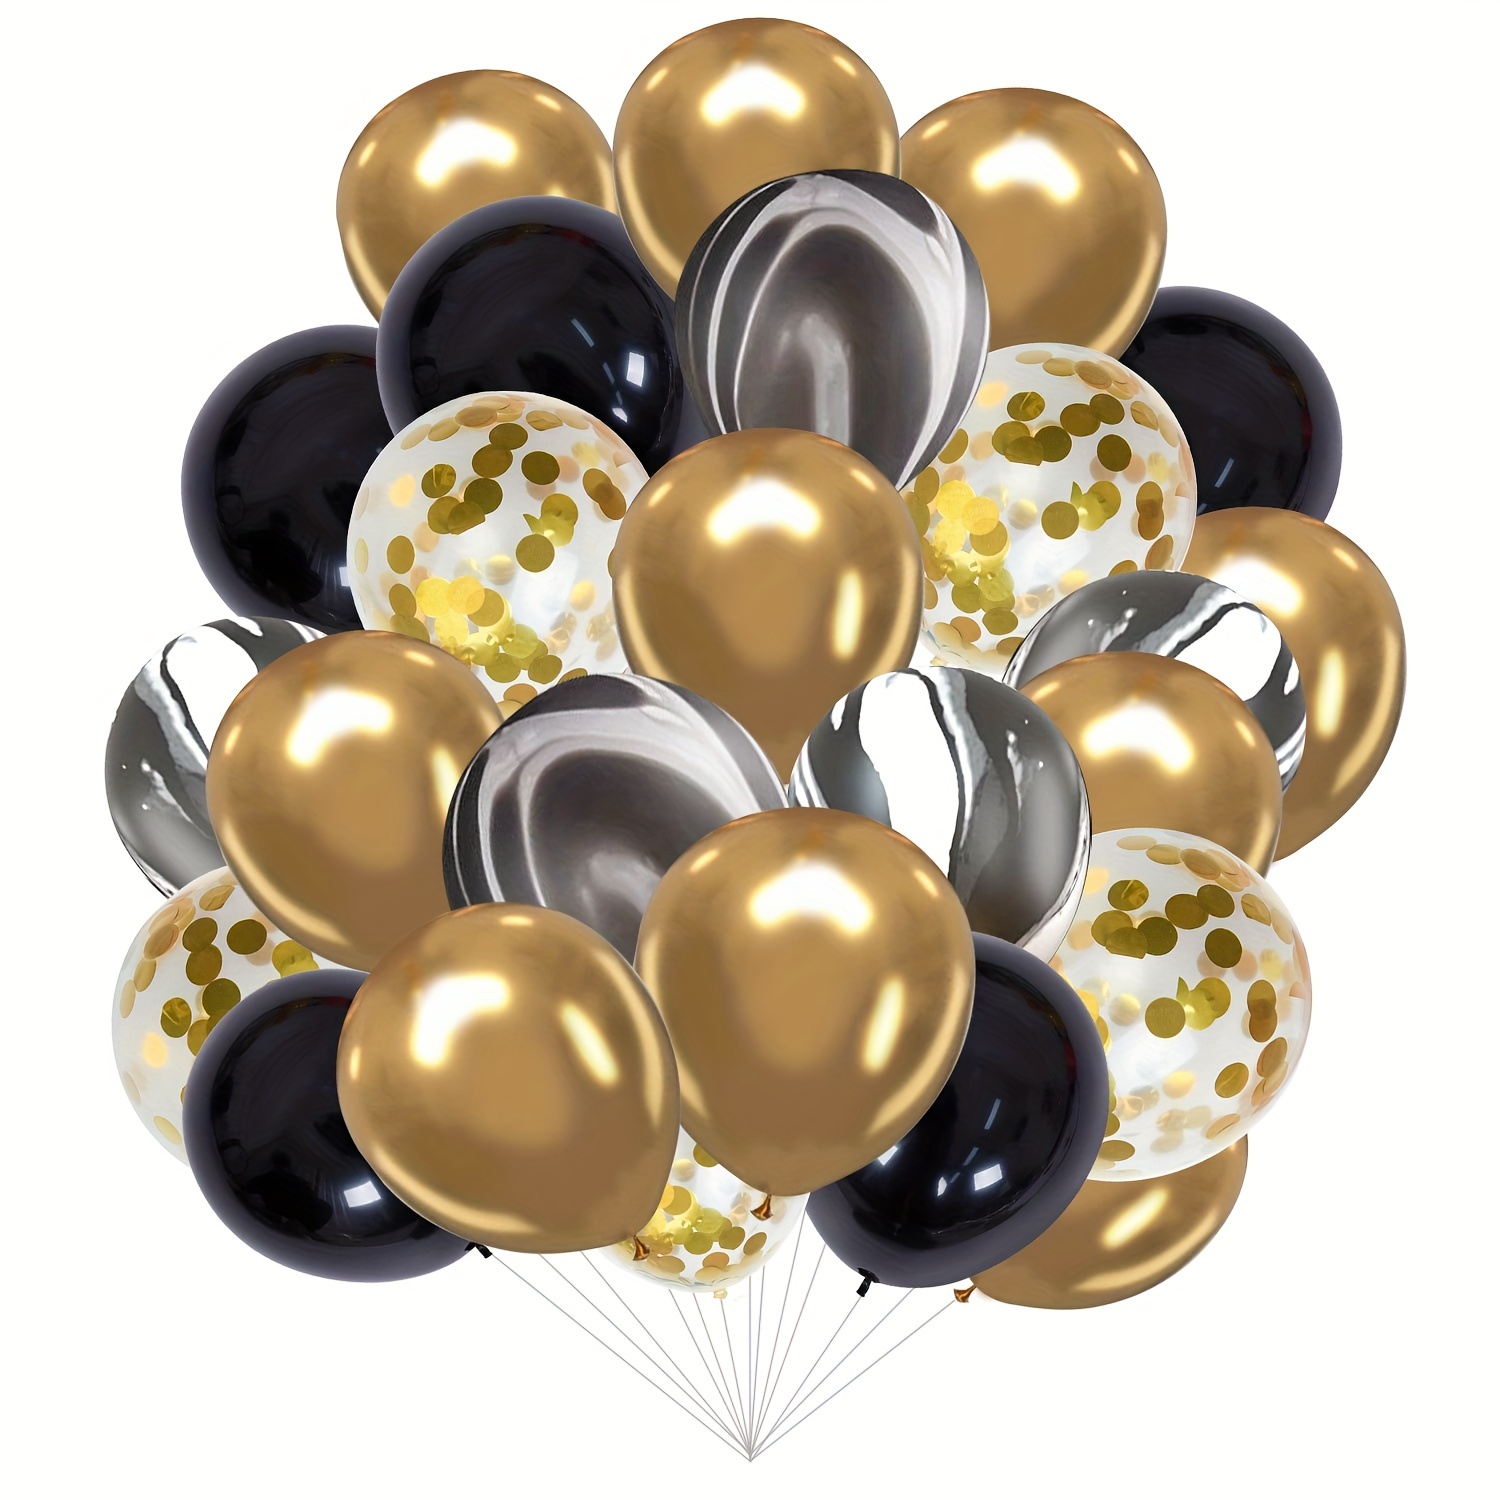 70 piece party latex confetti balloons